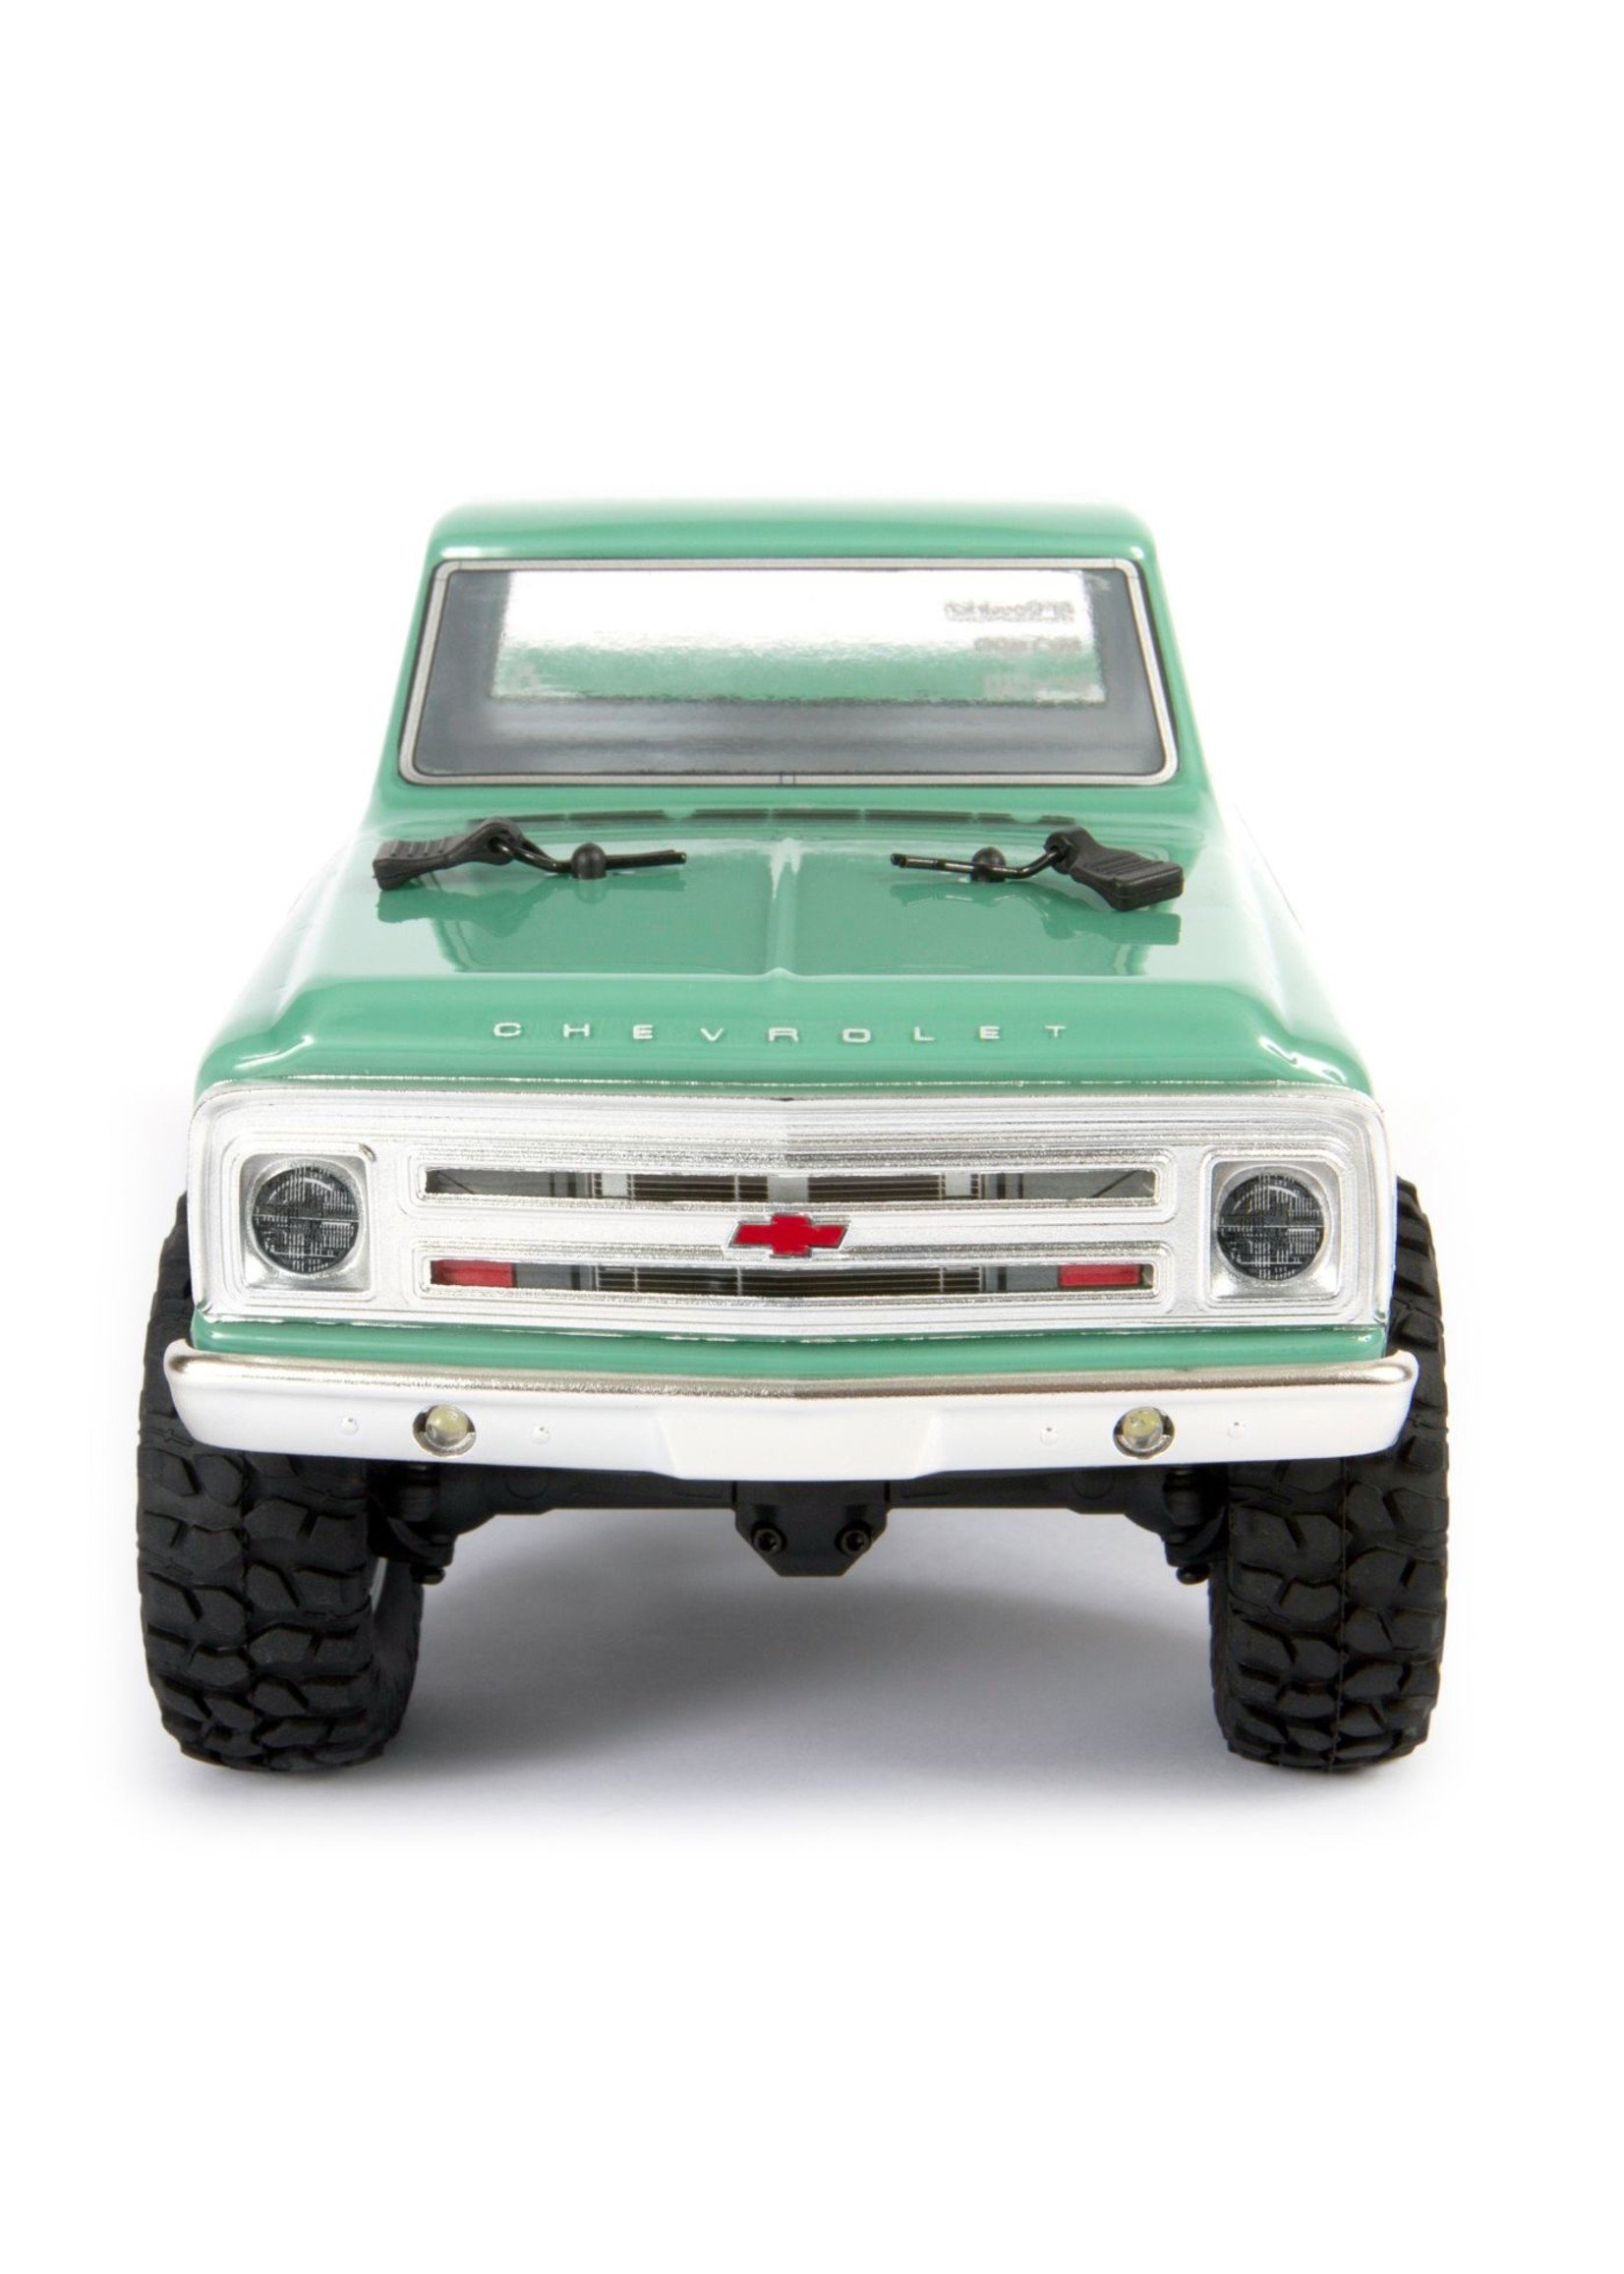 Axial 1/24 SCX24 1967 Chevrolet C10 4WD Truck Brushed RTR - Light Green